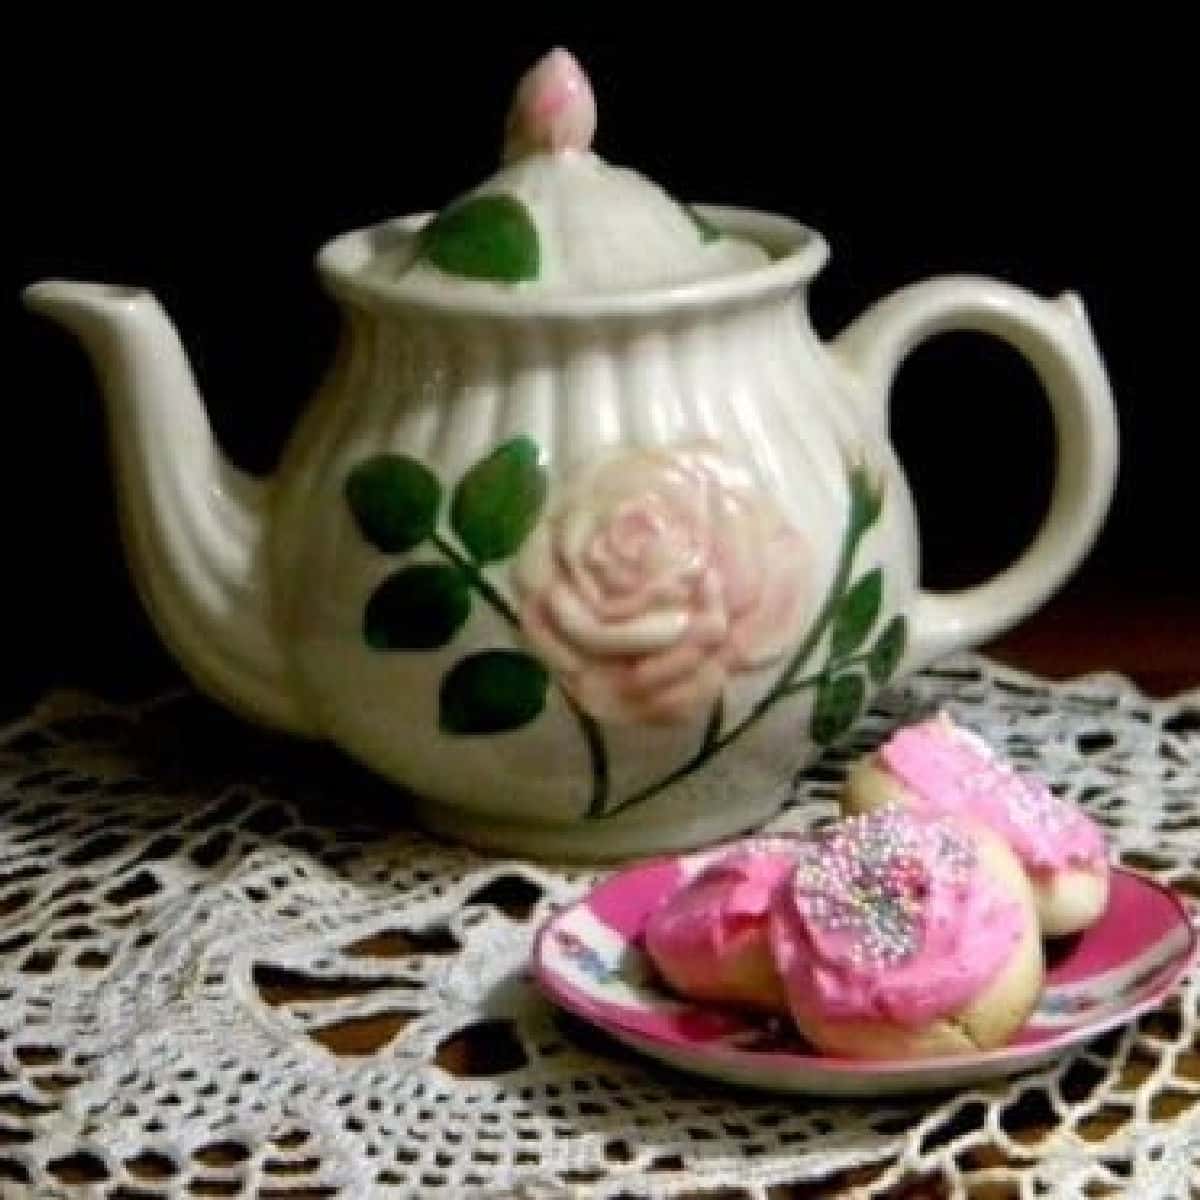 A white vintage teapot and a plate of cookies sit on a lace tablecloth.